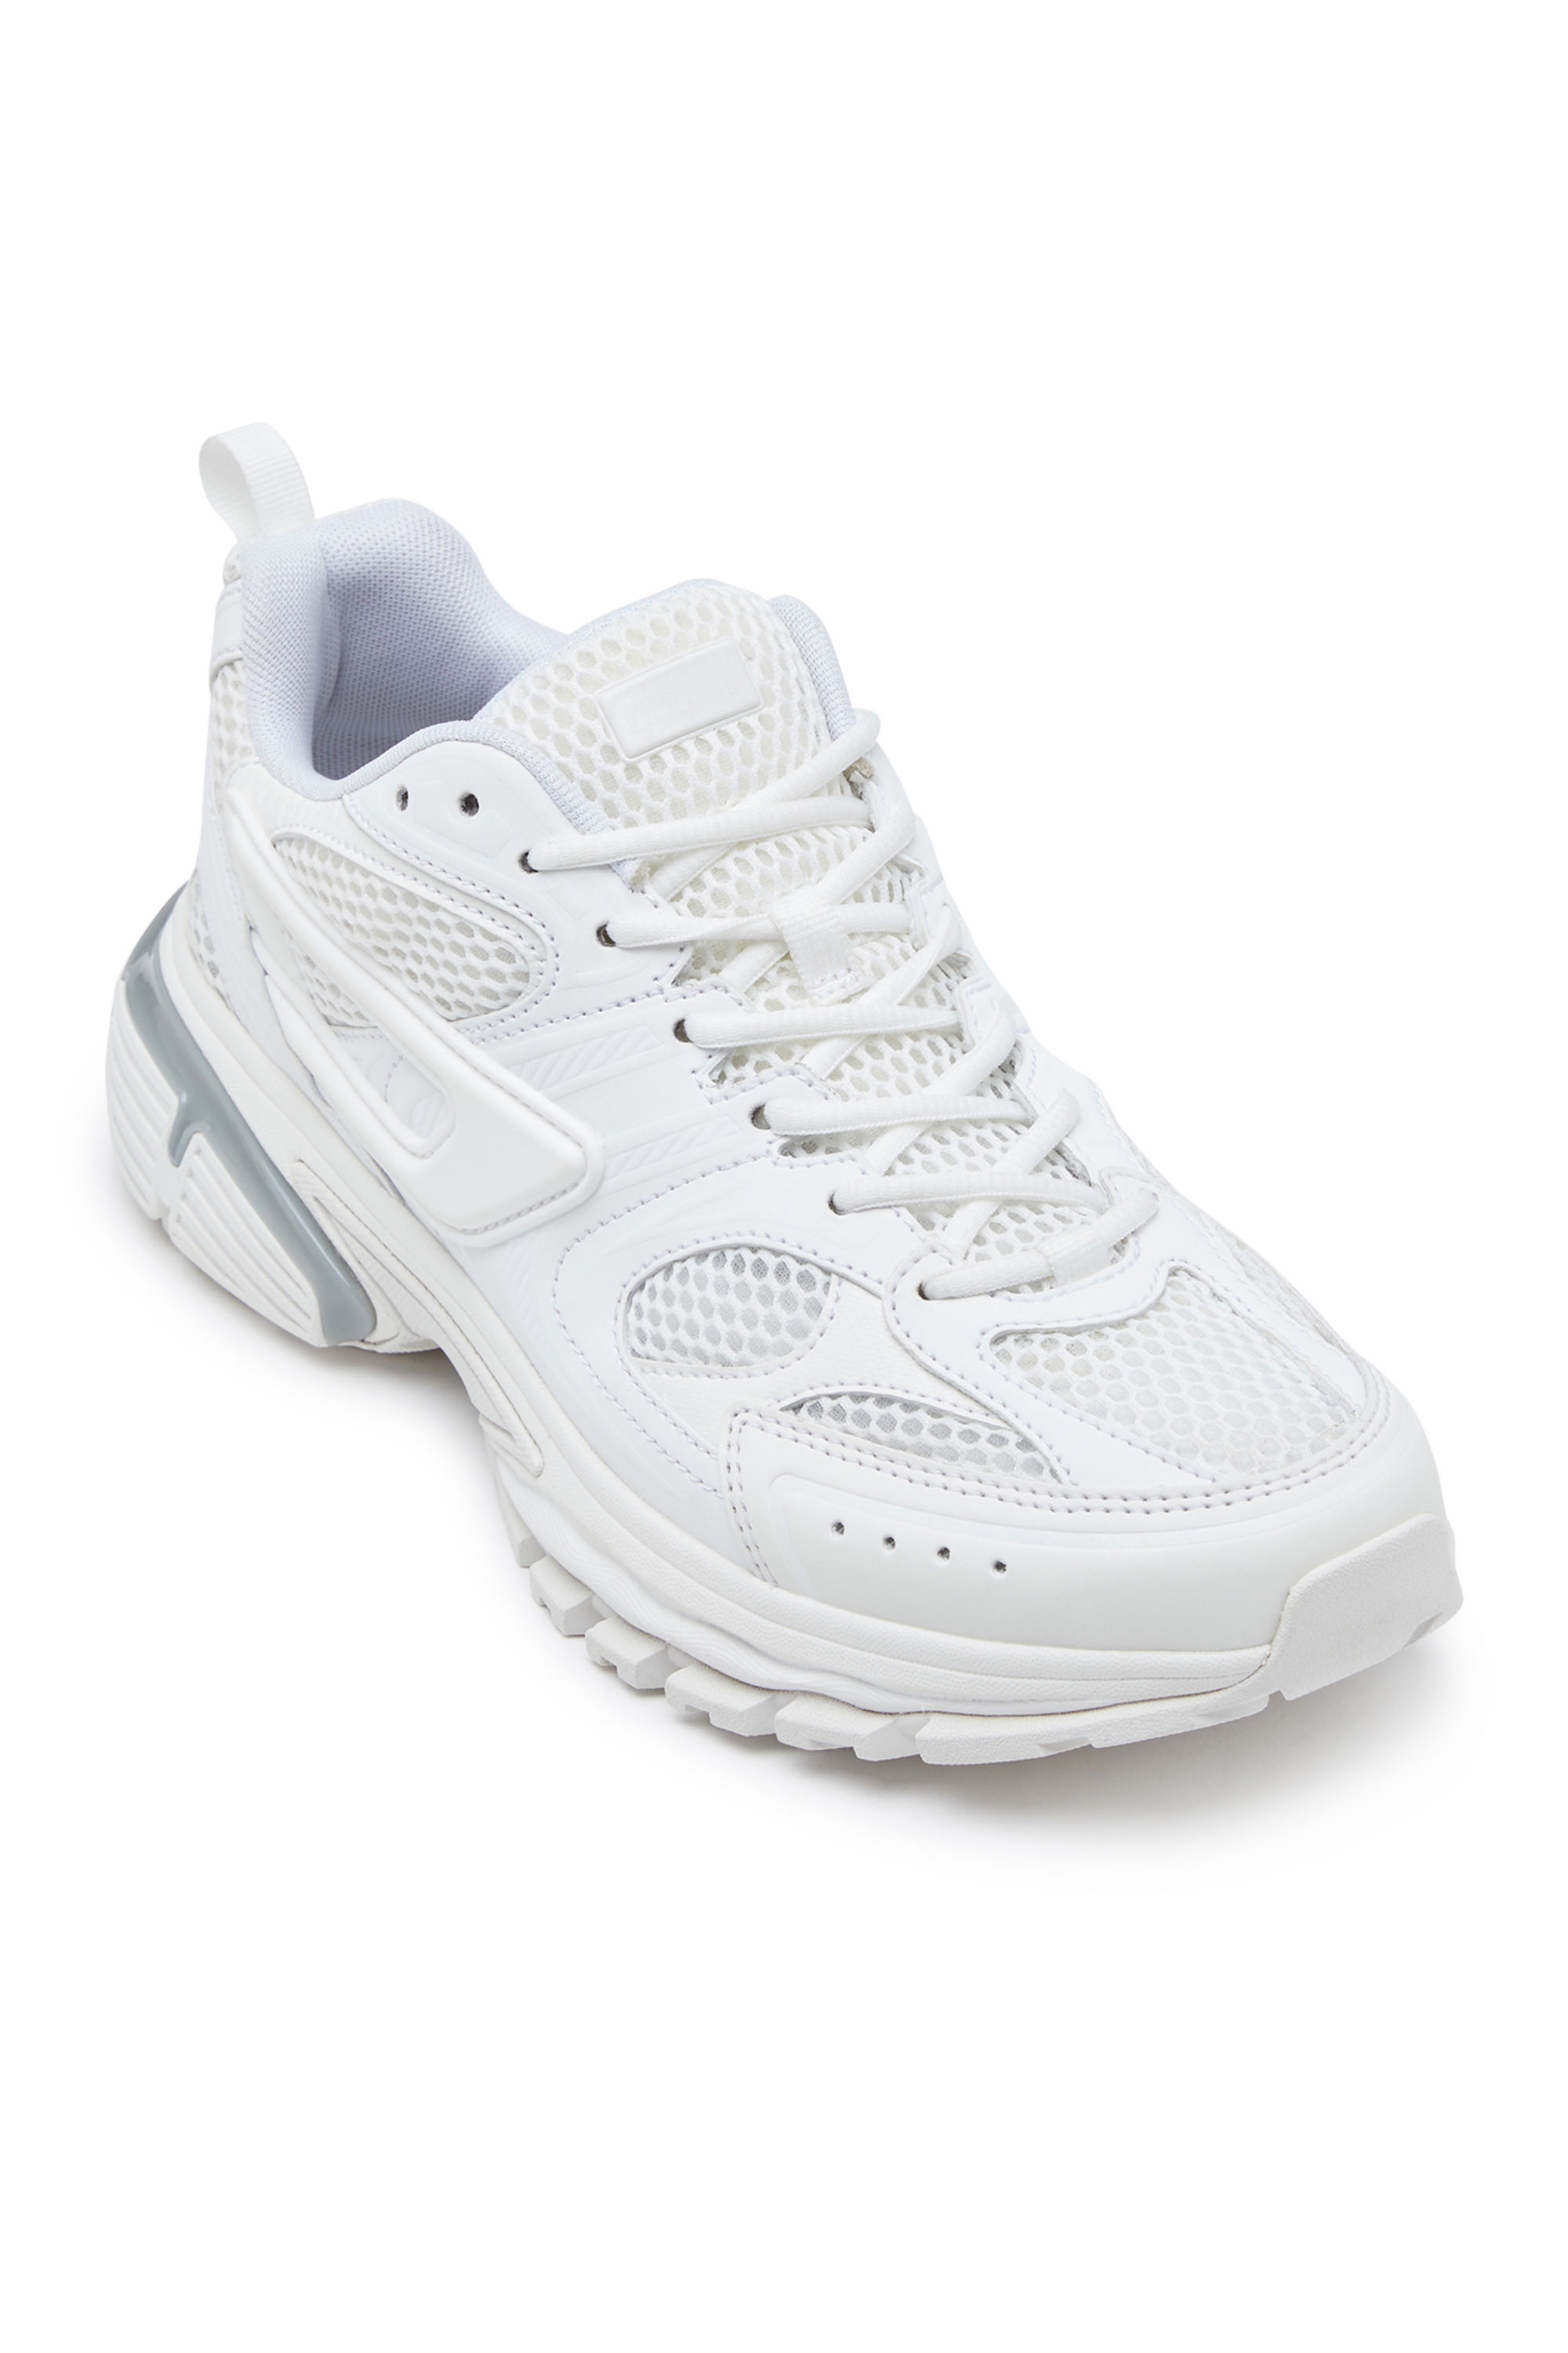 Diesel - S-SERENDIPITY PRO-X1 W, Woman S-Serendipity Pro-X1 W - Mesh sneakers with embossed overlays in White - Image 7